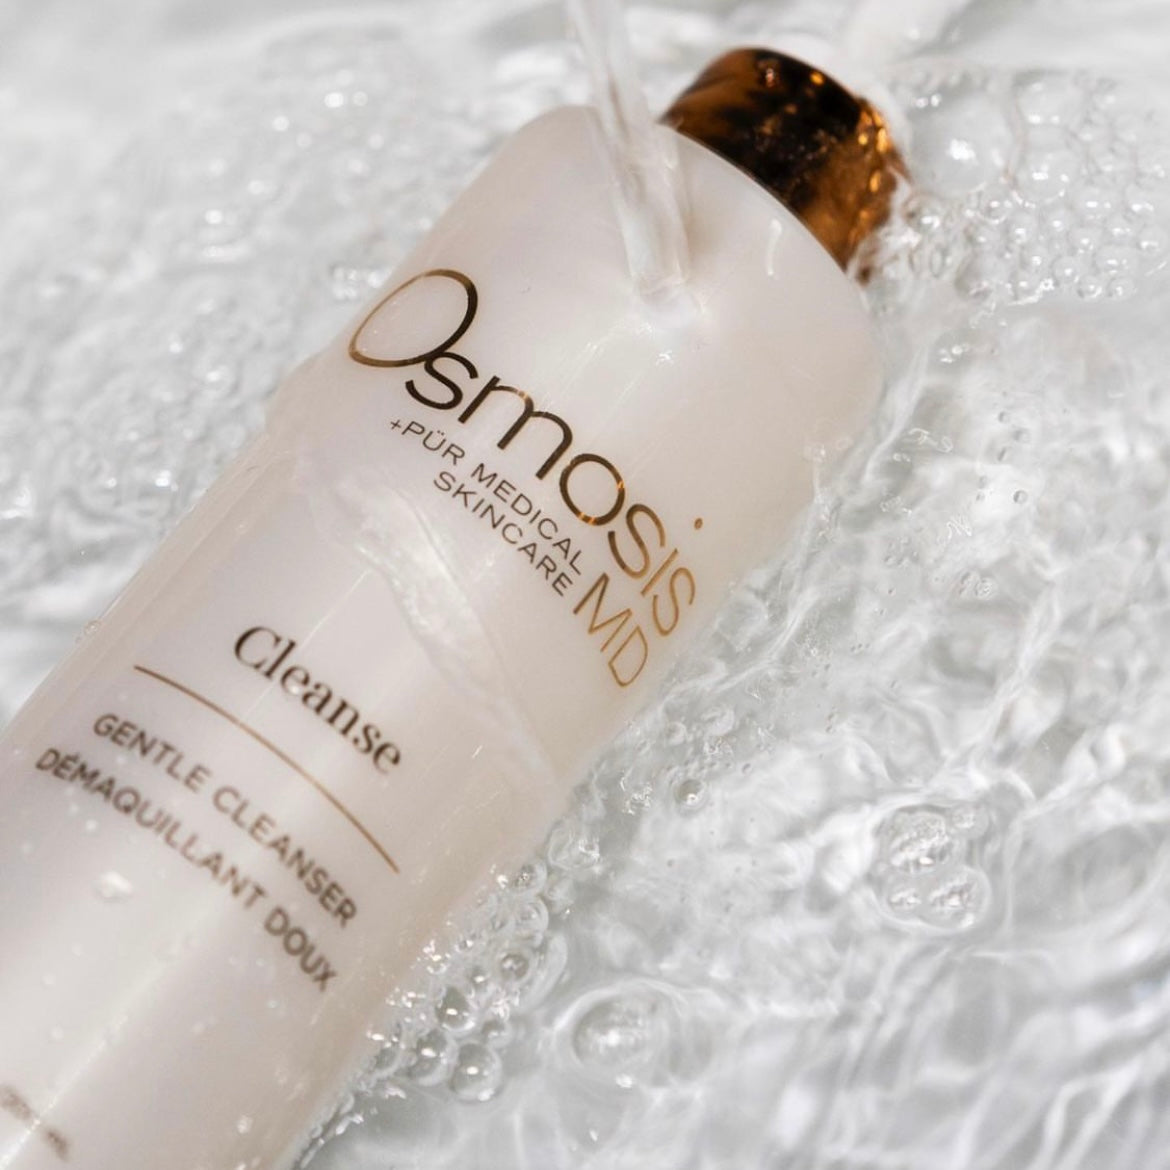 Osmosis Gentle Cleanser 200ml